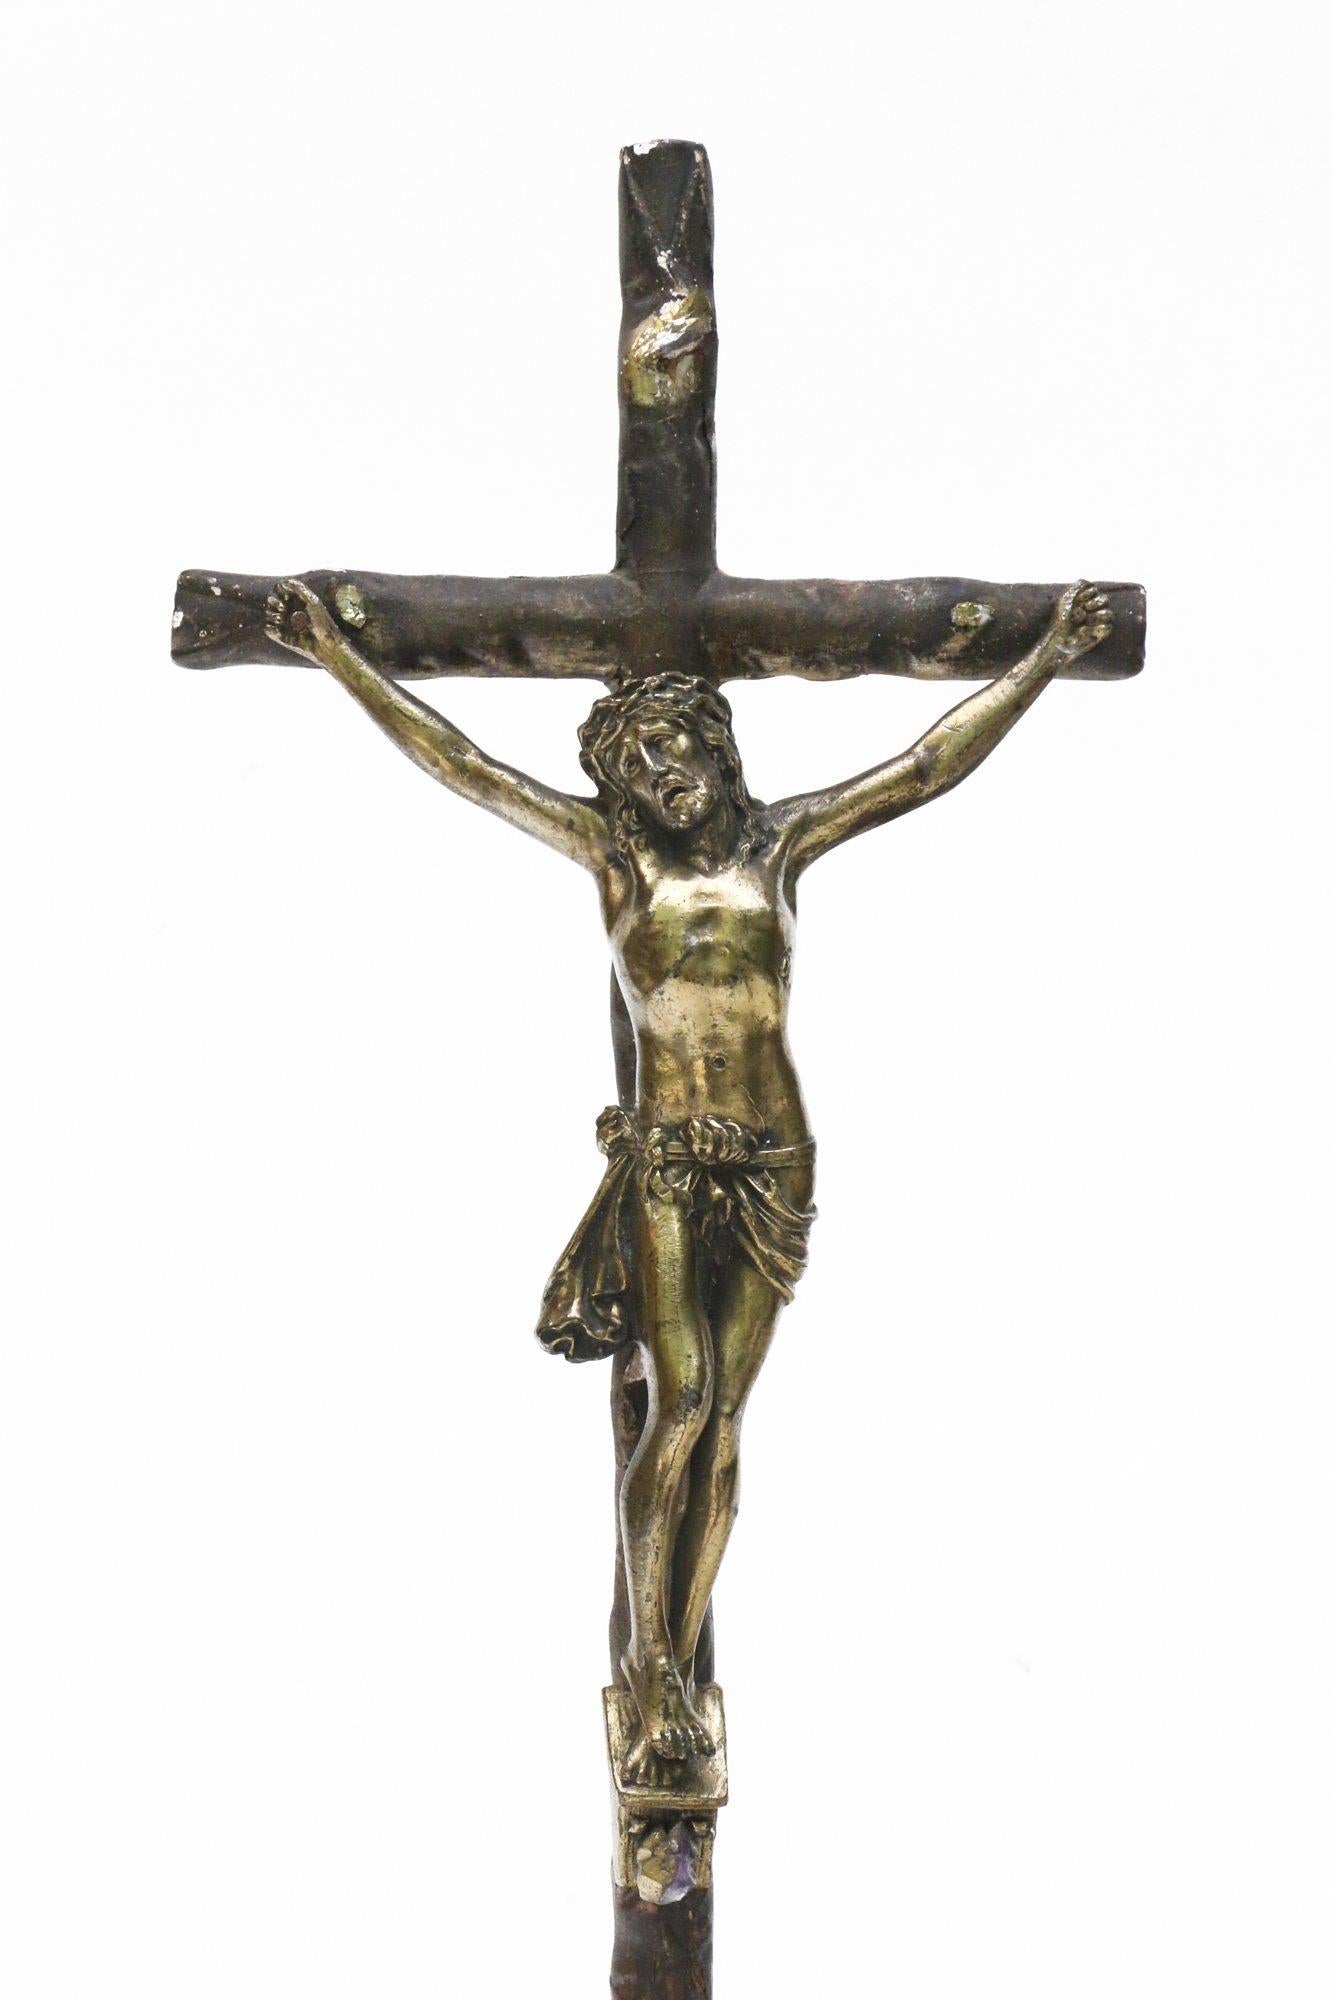 18th century Italian crucifix with gold-plated rock crystals. The crucifix came from a church in Liguria. The base of the crucifix coordinates with the bronze figure of Christ. The overall piece is accented with gold plated rock crystals.